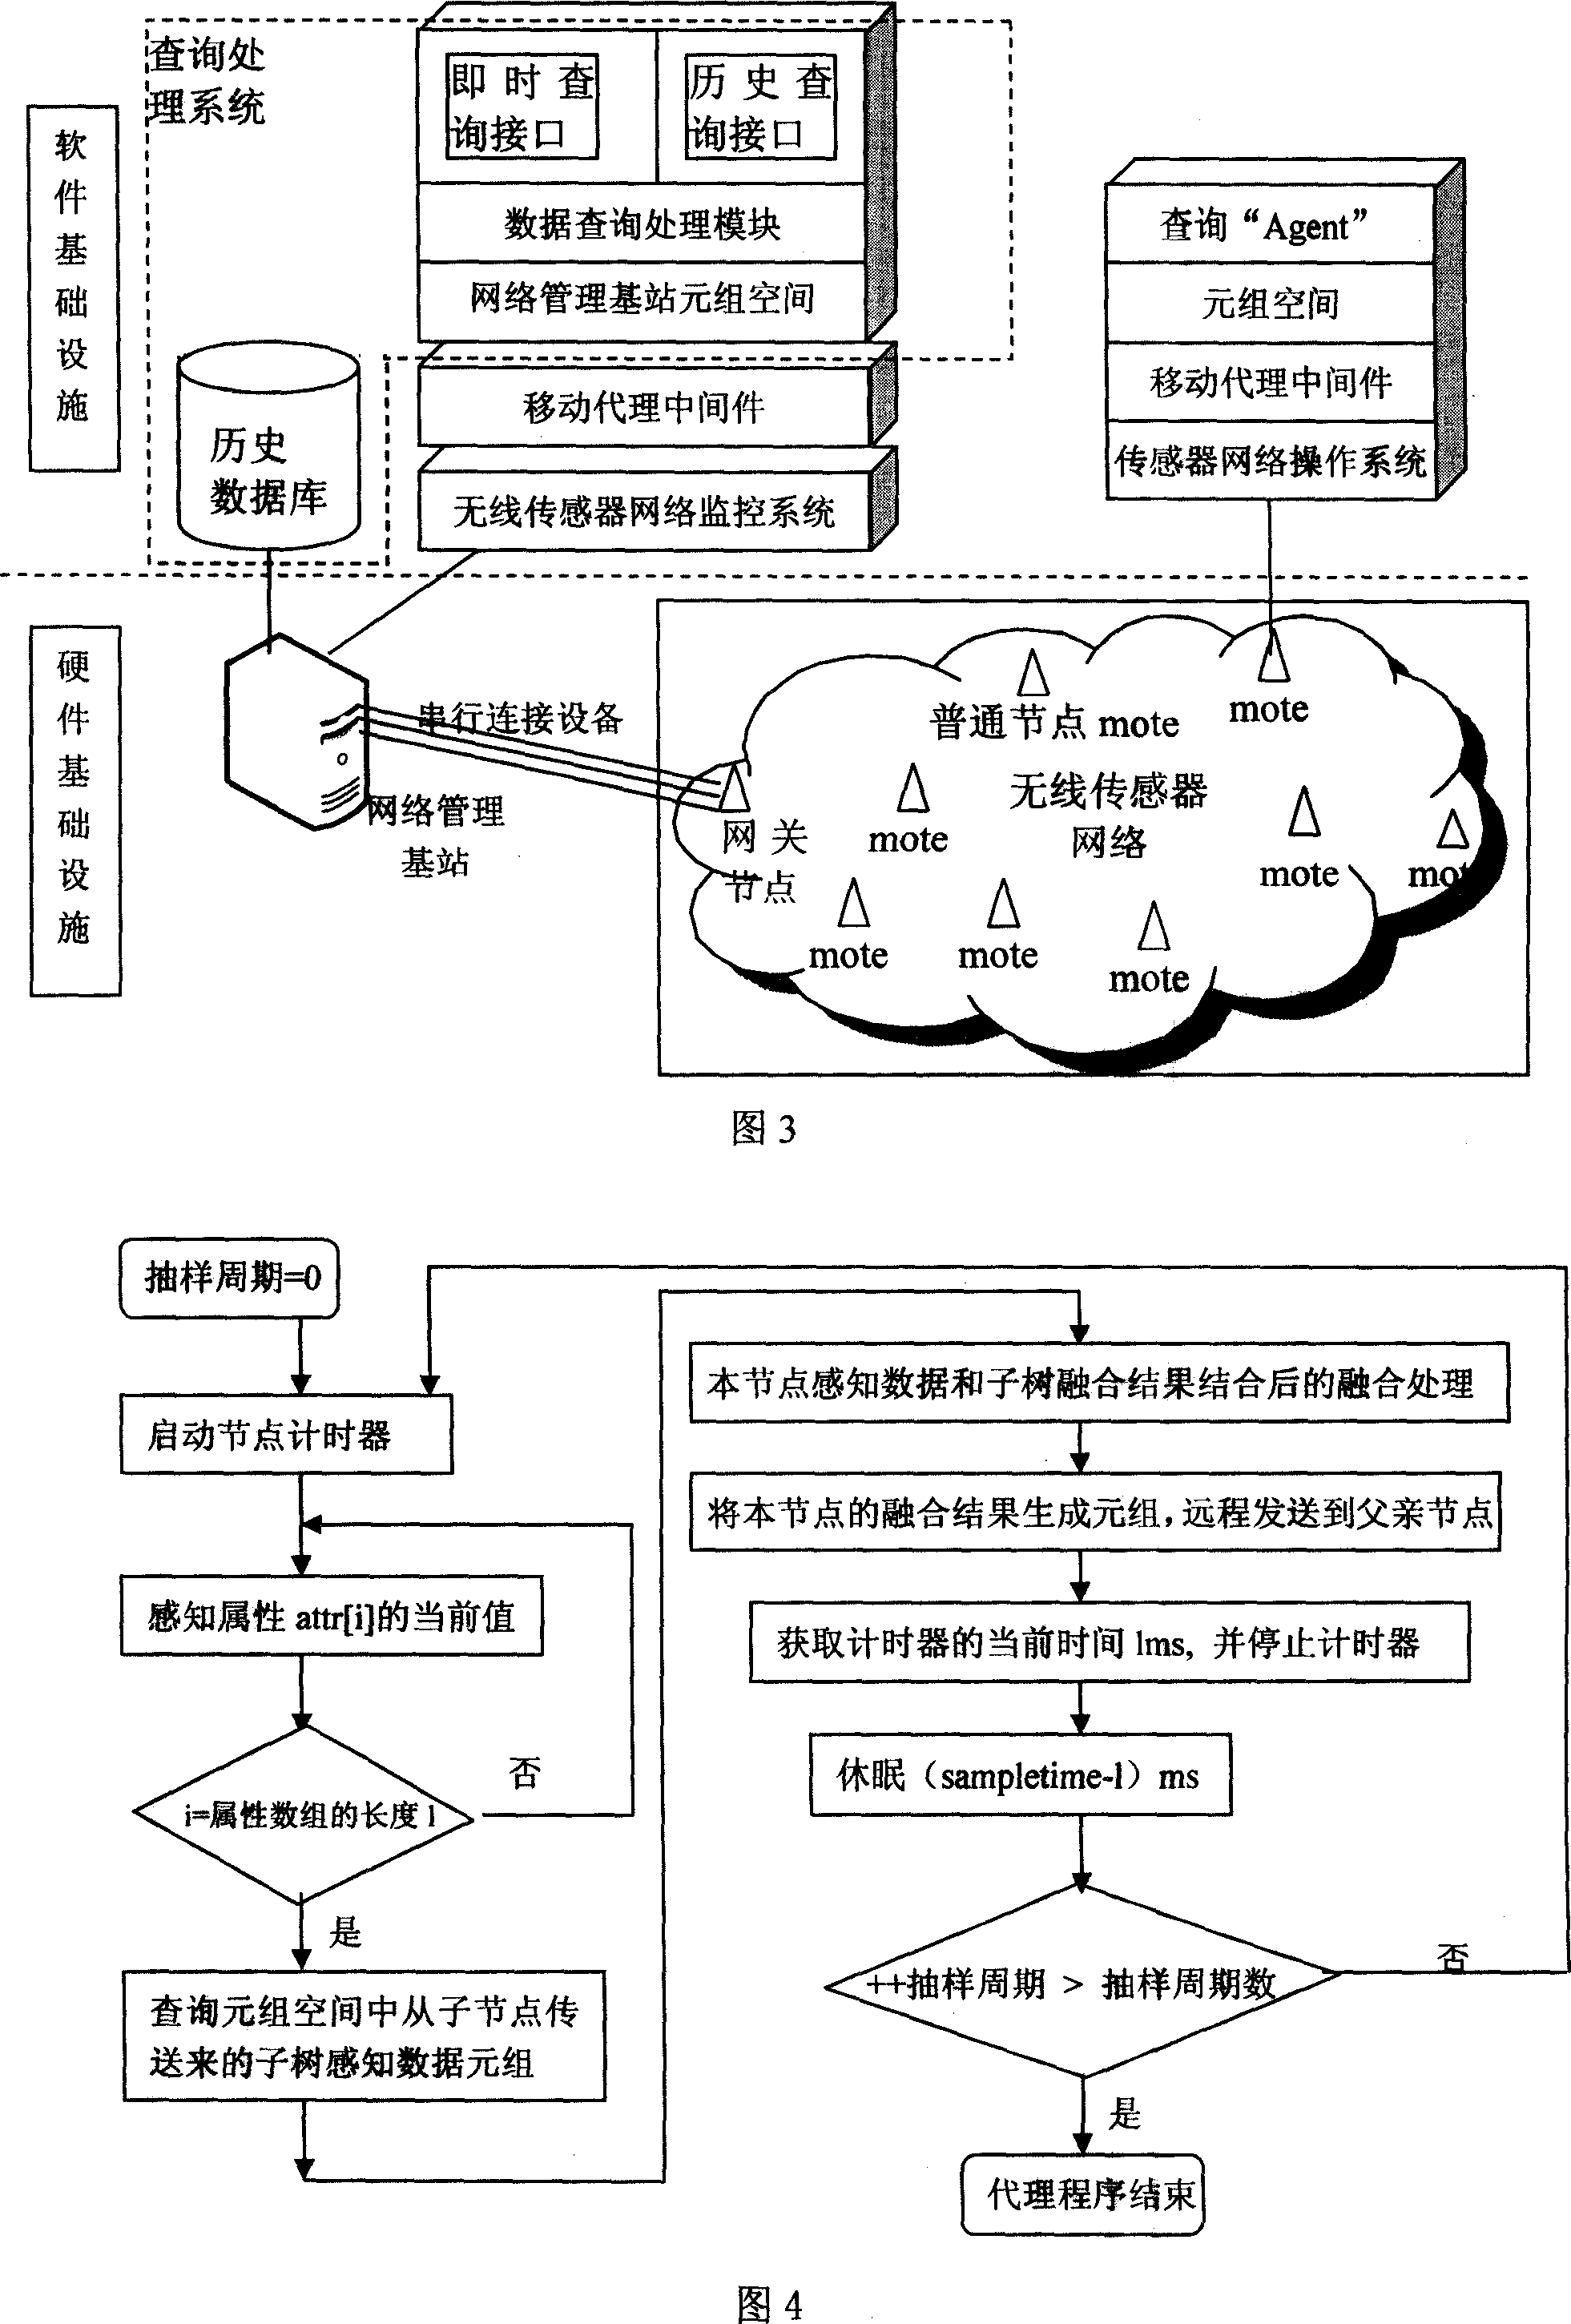 Method for realizing data inquiring system of sensor network based on middleware of mobile agent